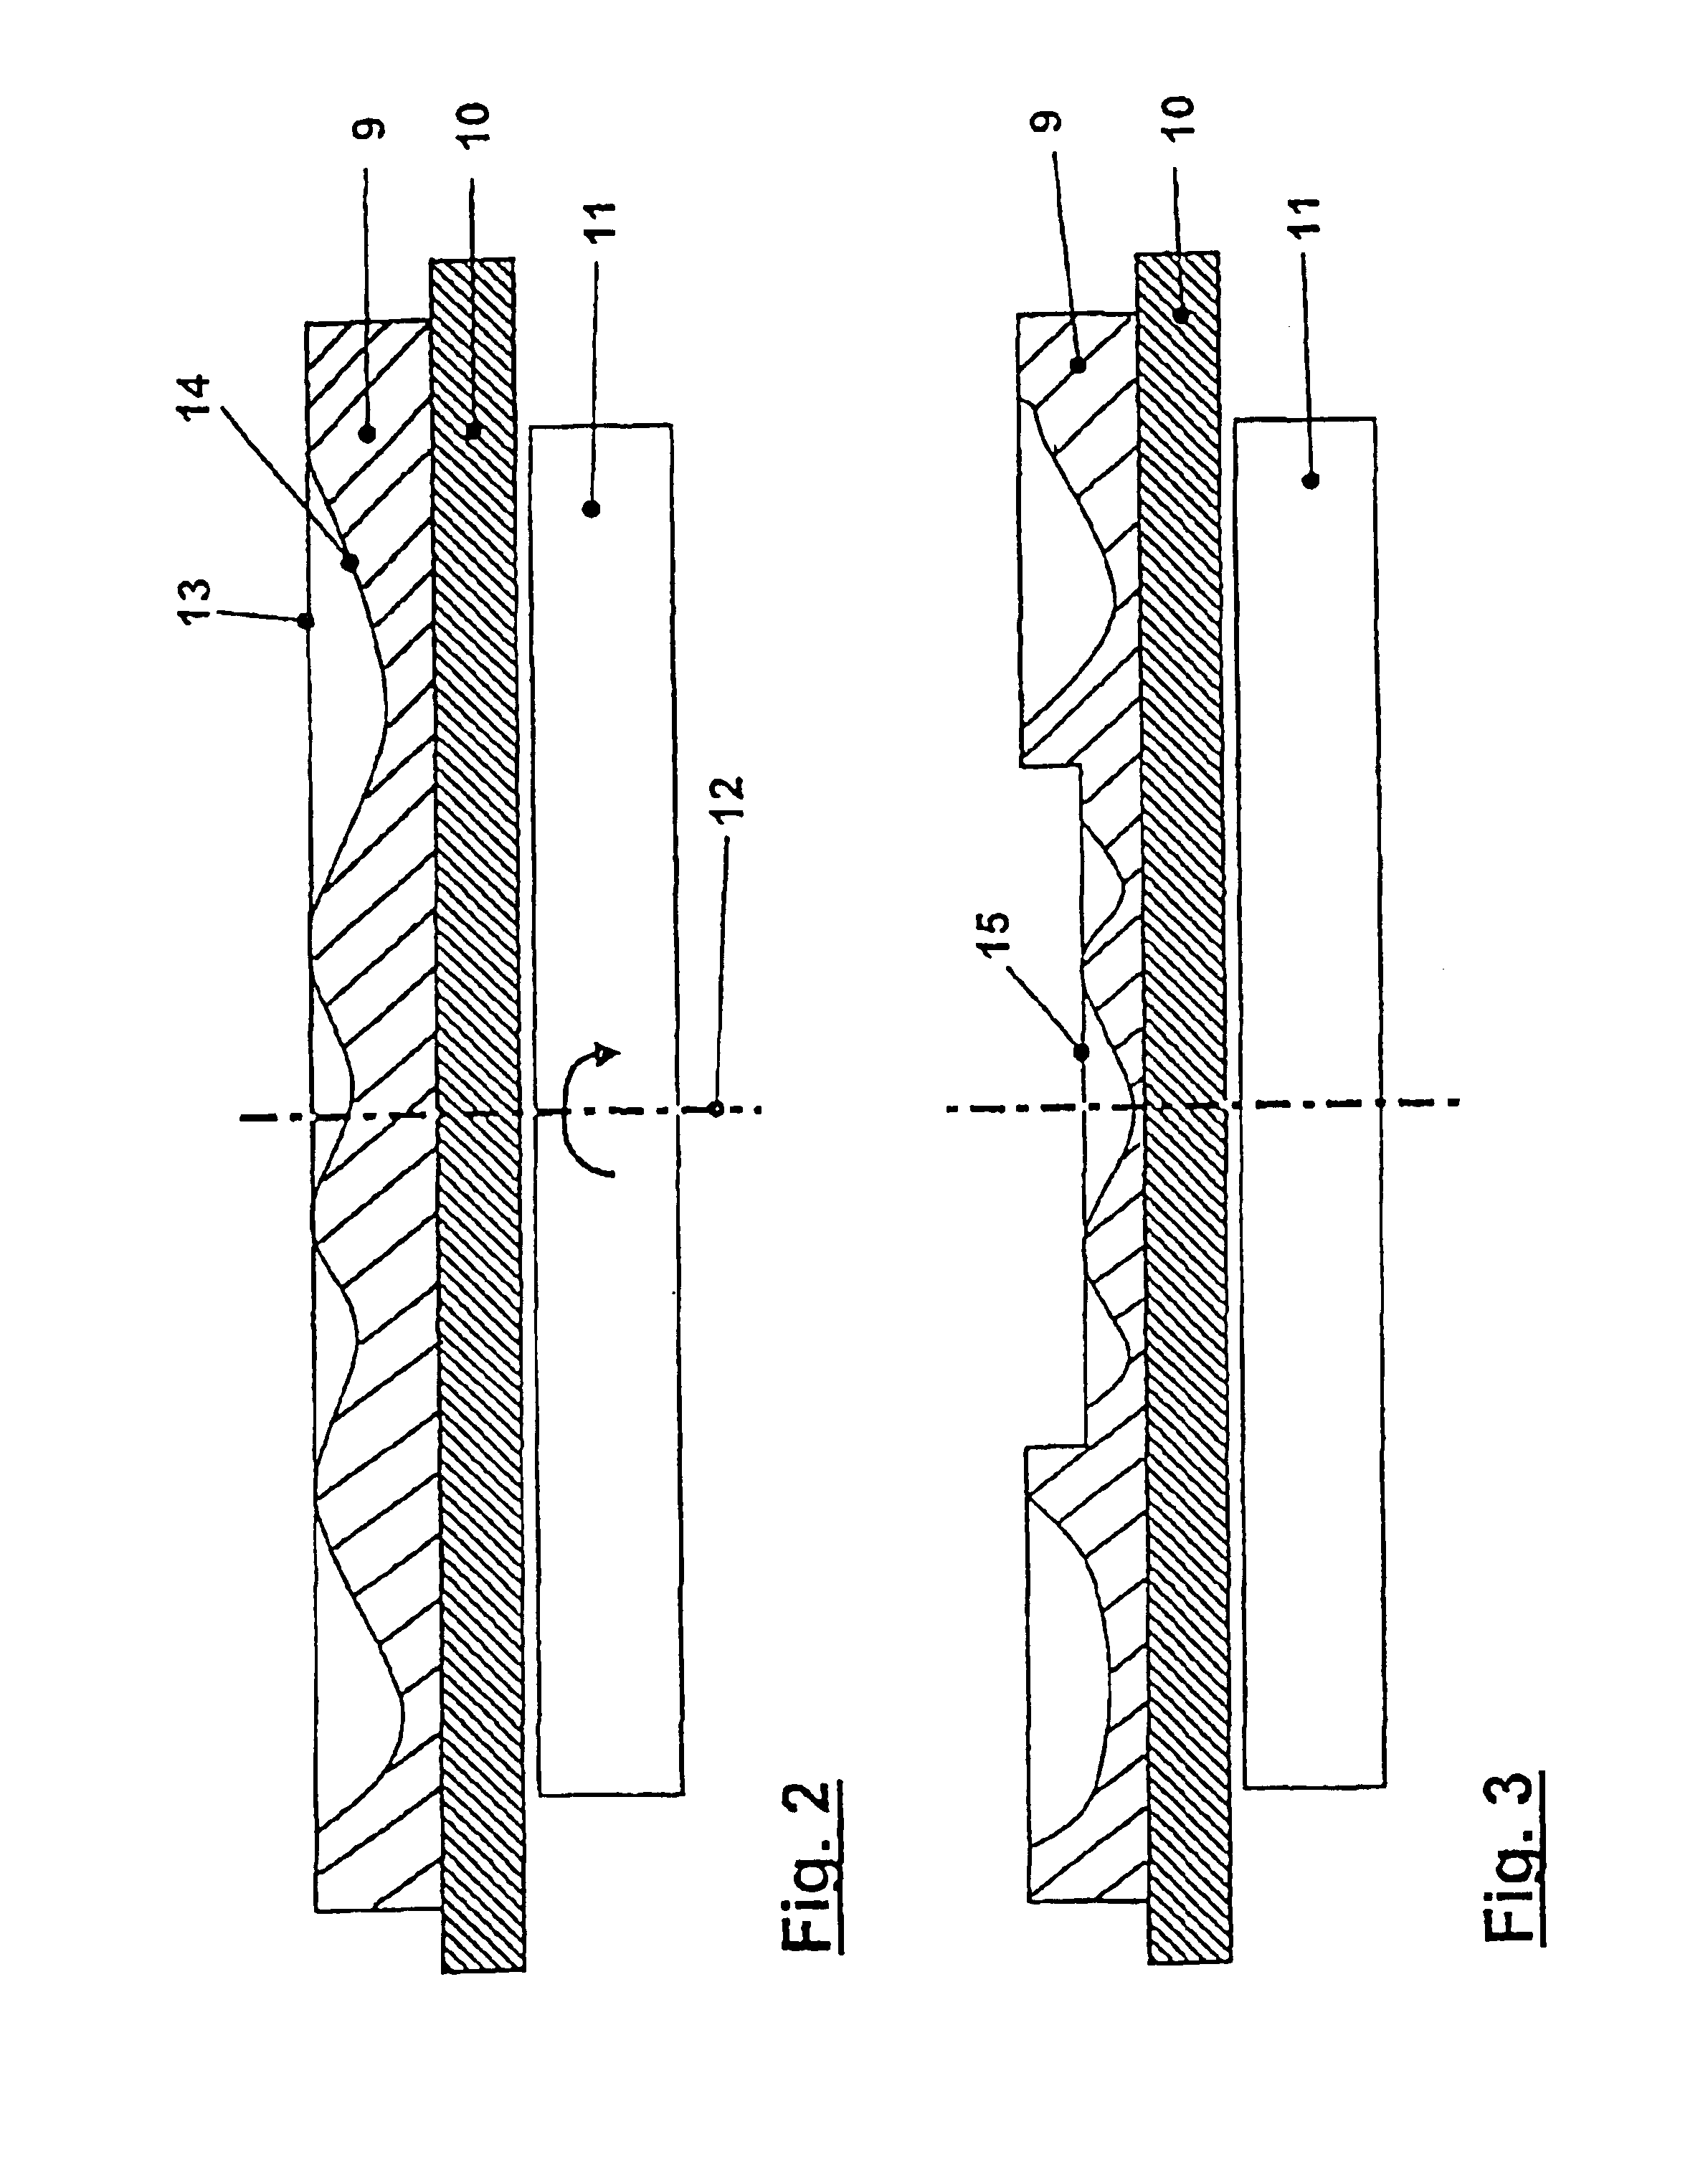 Target comprising thickness profiling for an RF magnetron